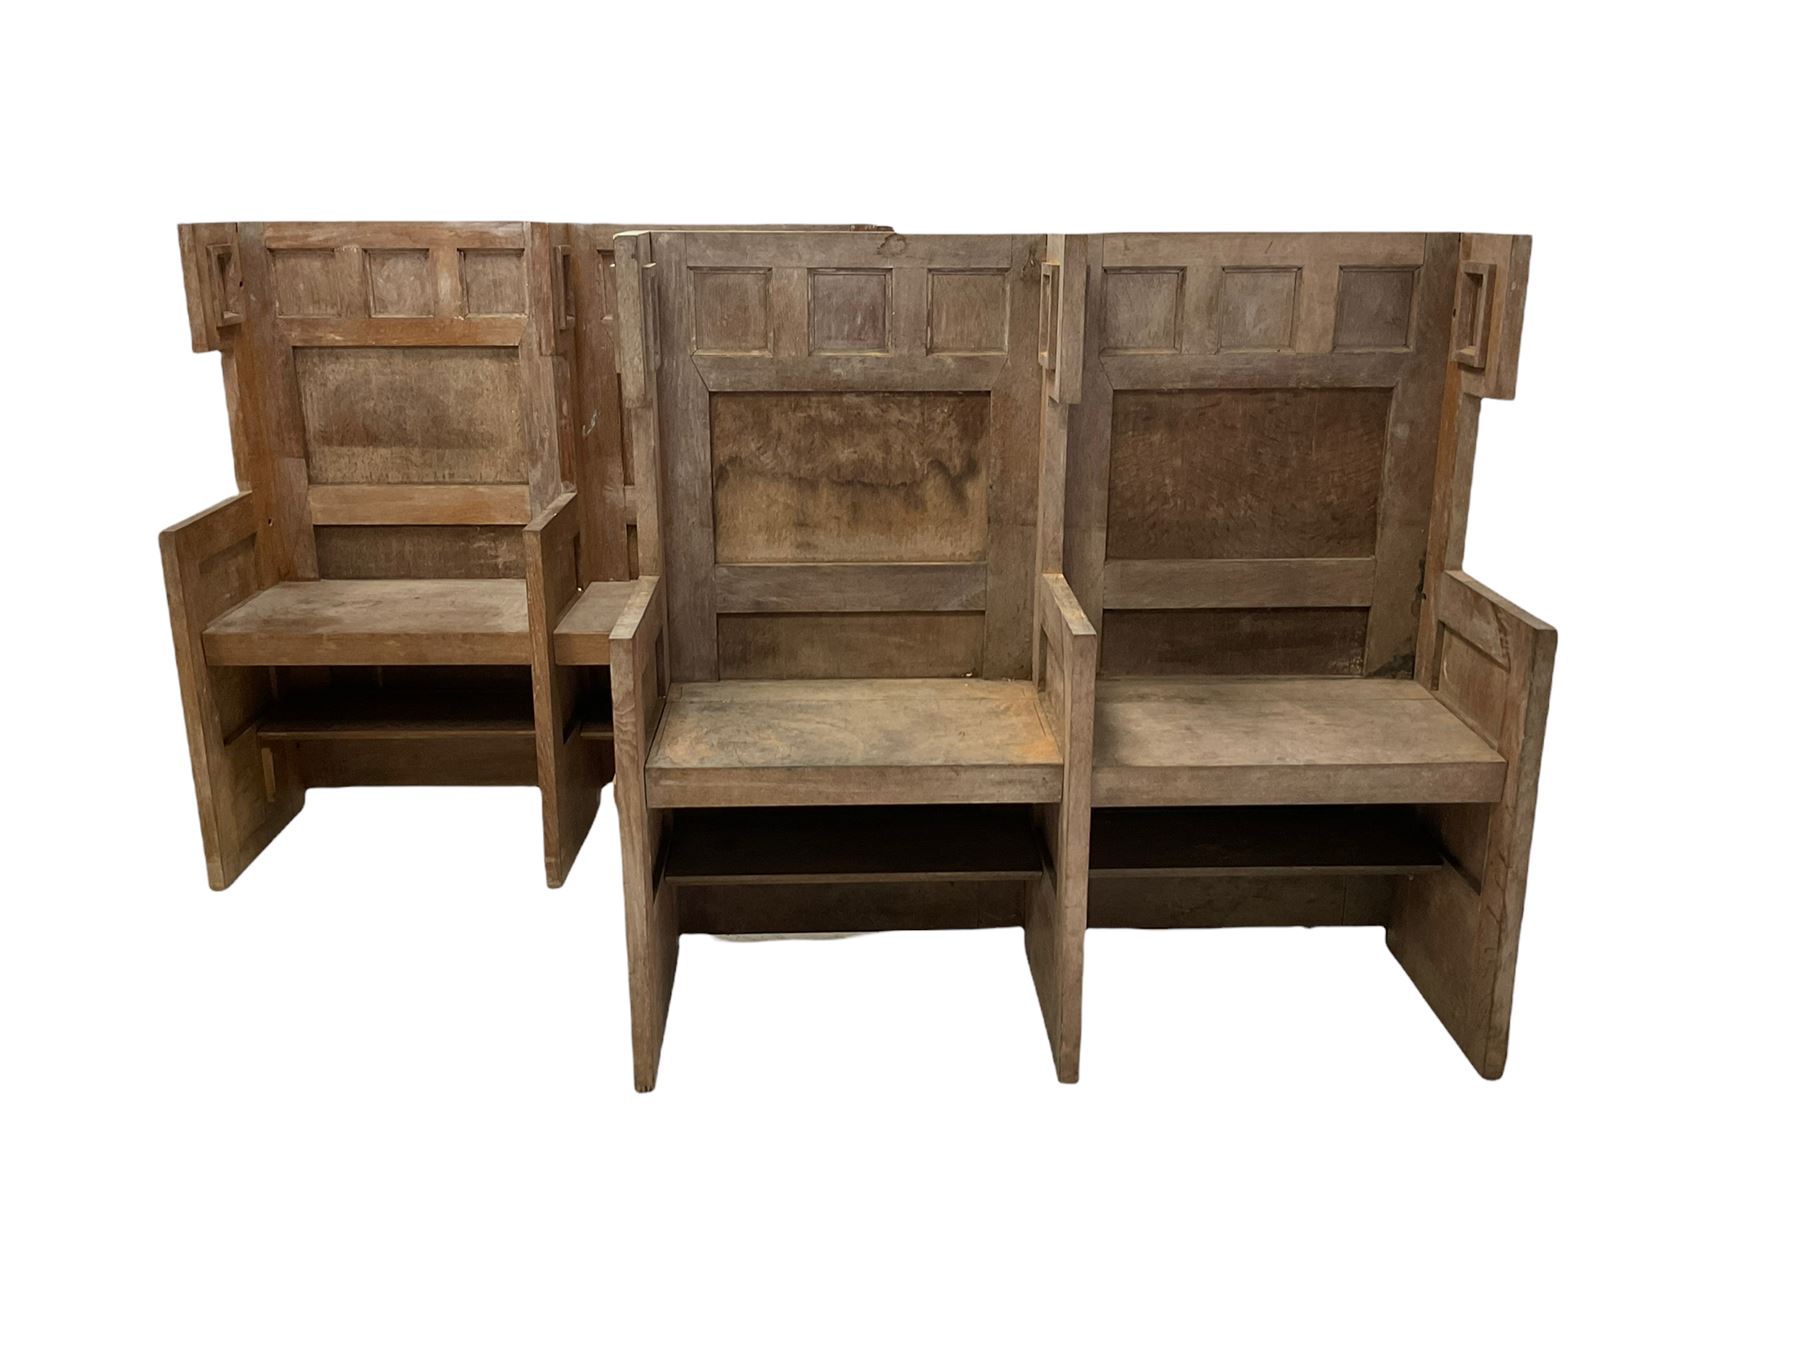 Pair of two seater oak priory pews with hinged seats W125cm - Image 6 of 7